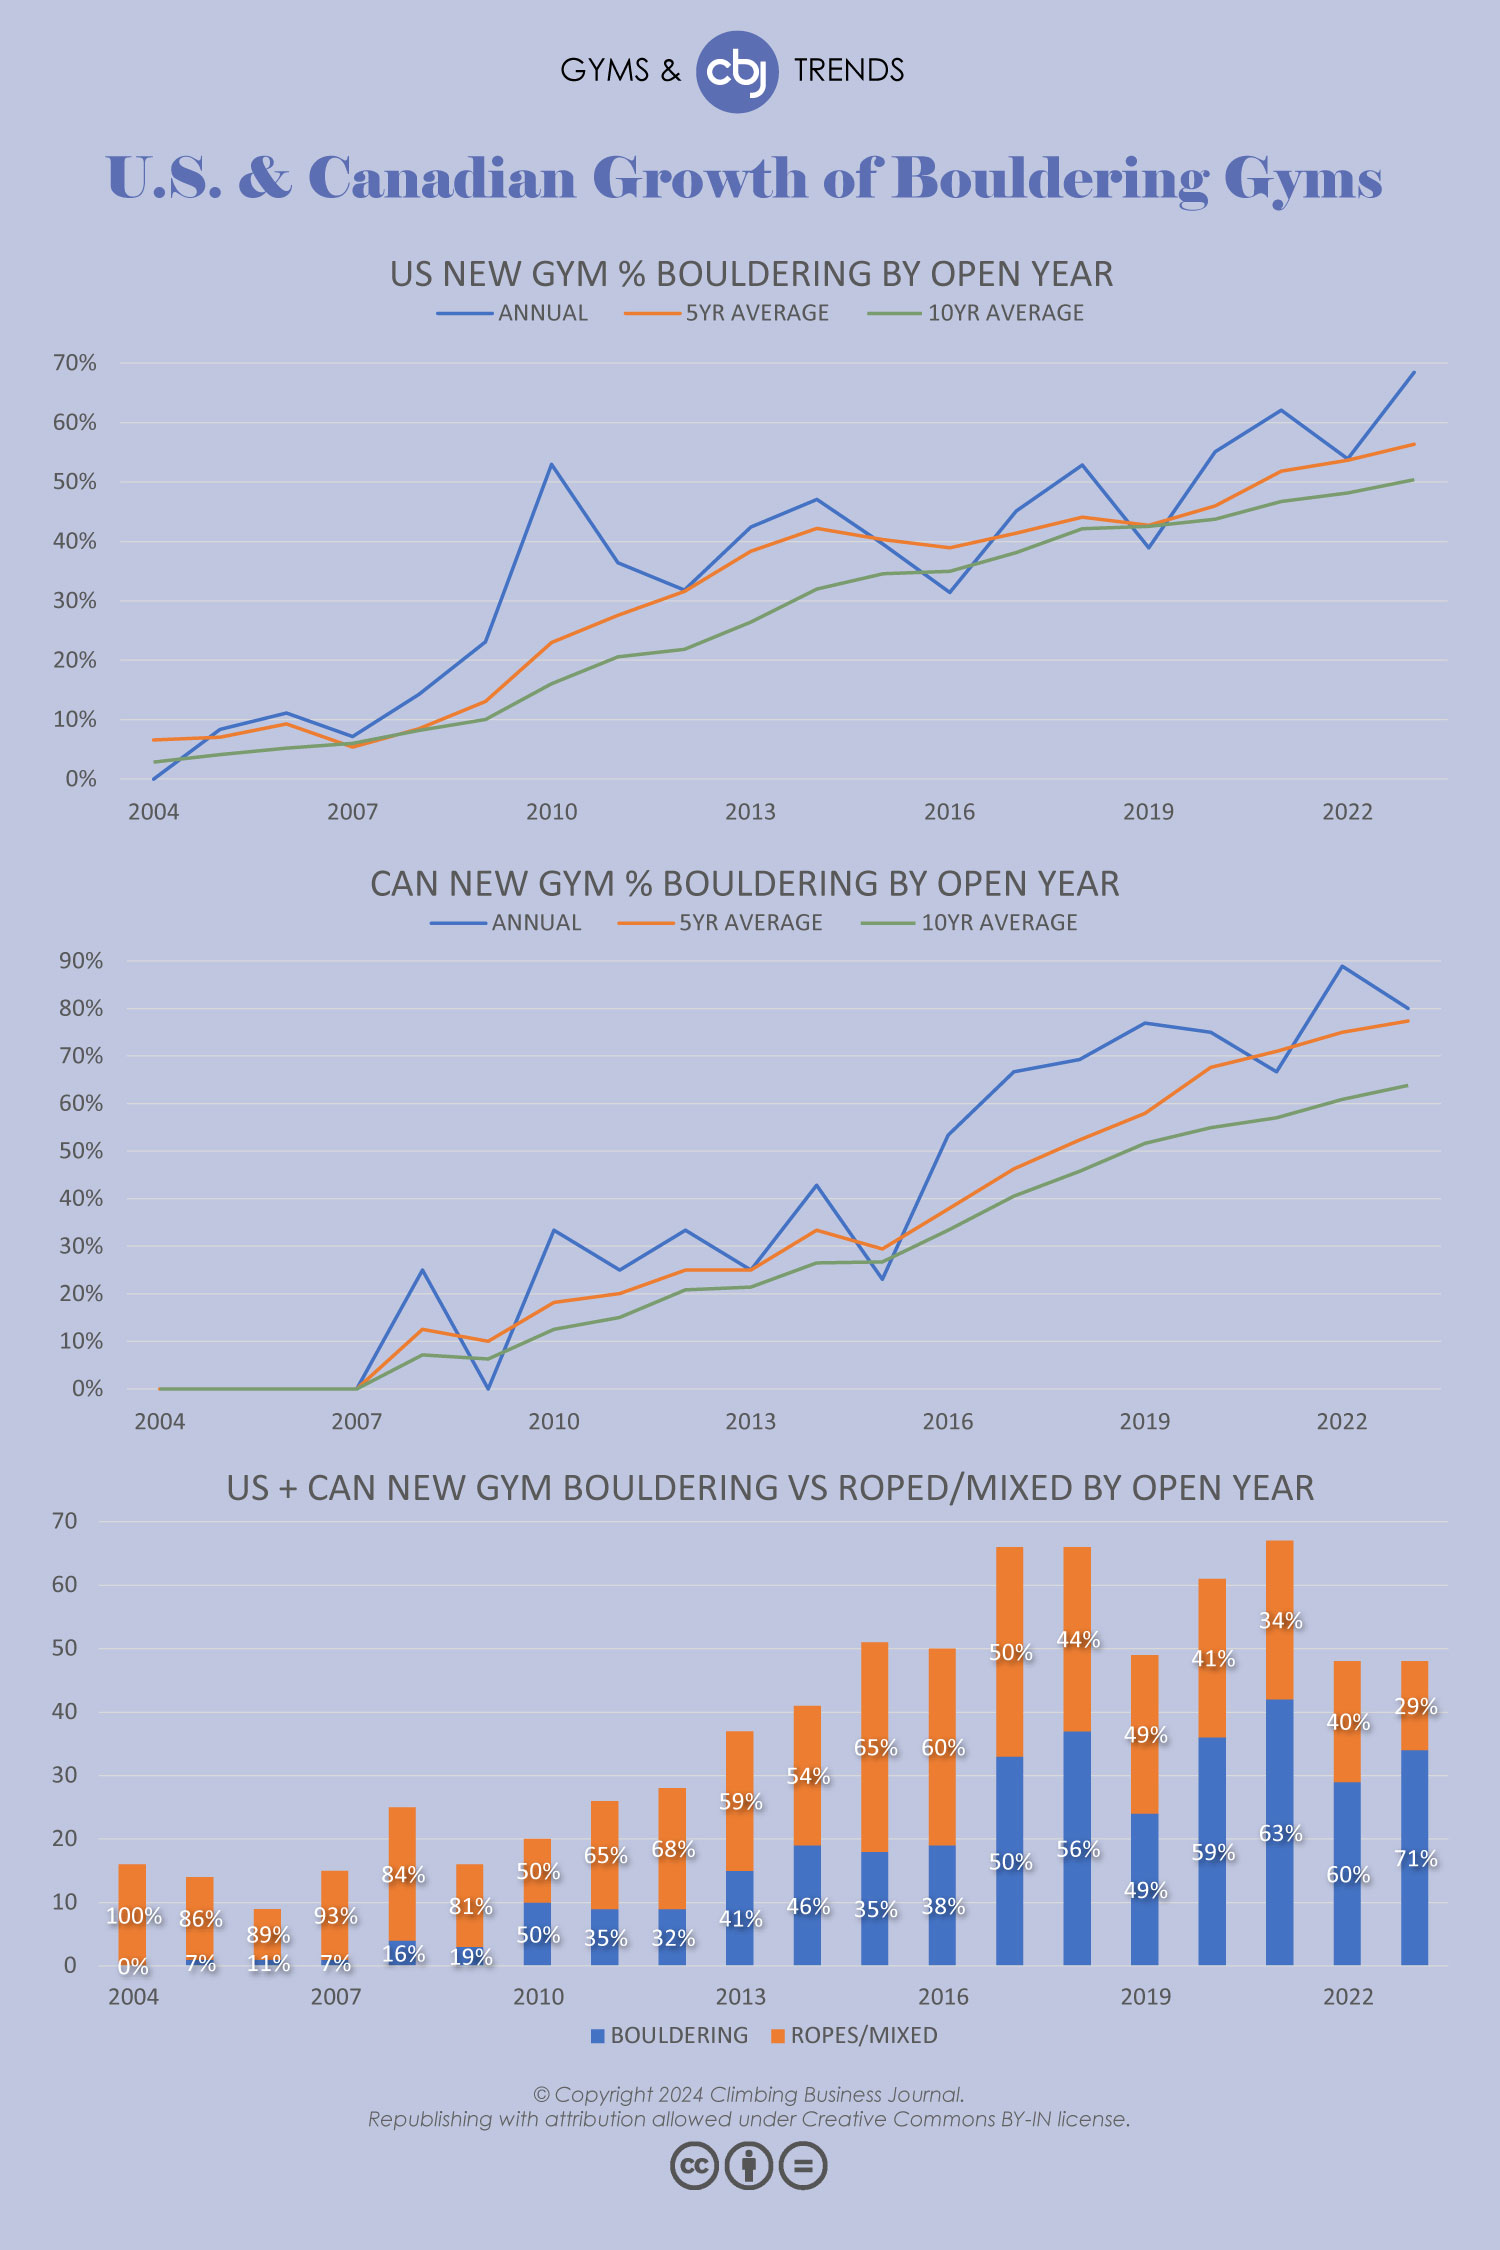 U.S. and Canadian Growth of Bouldering Gyms